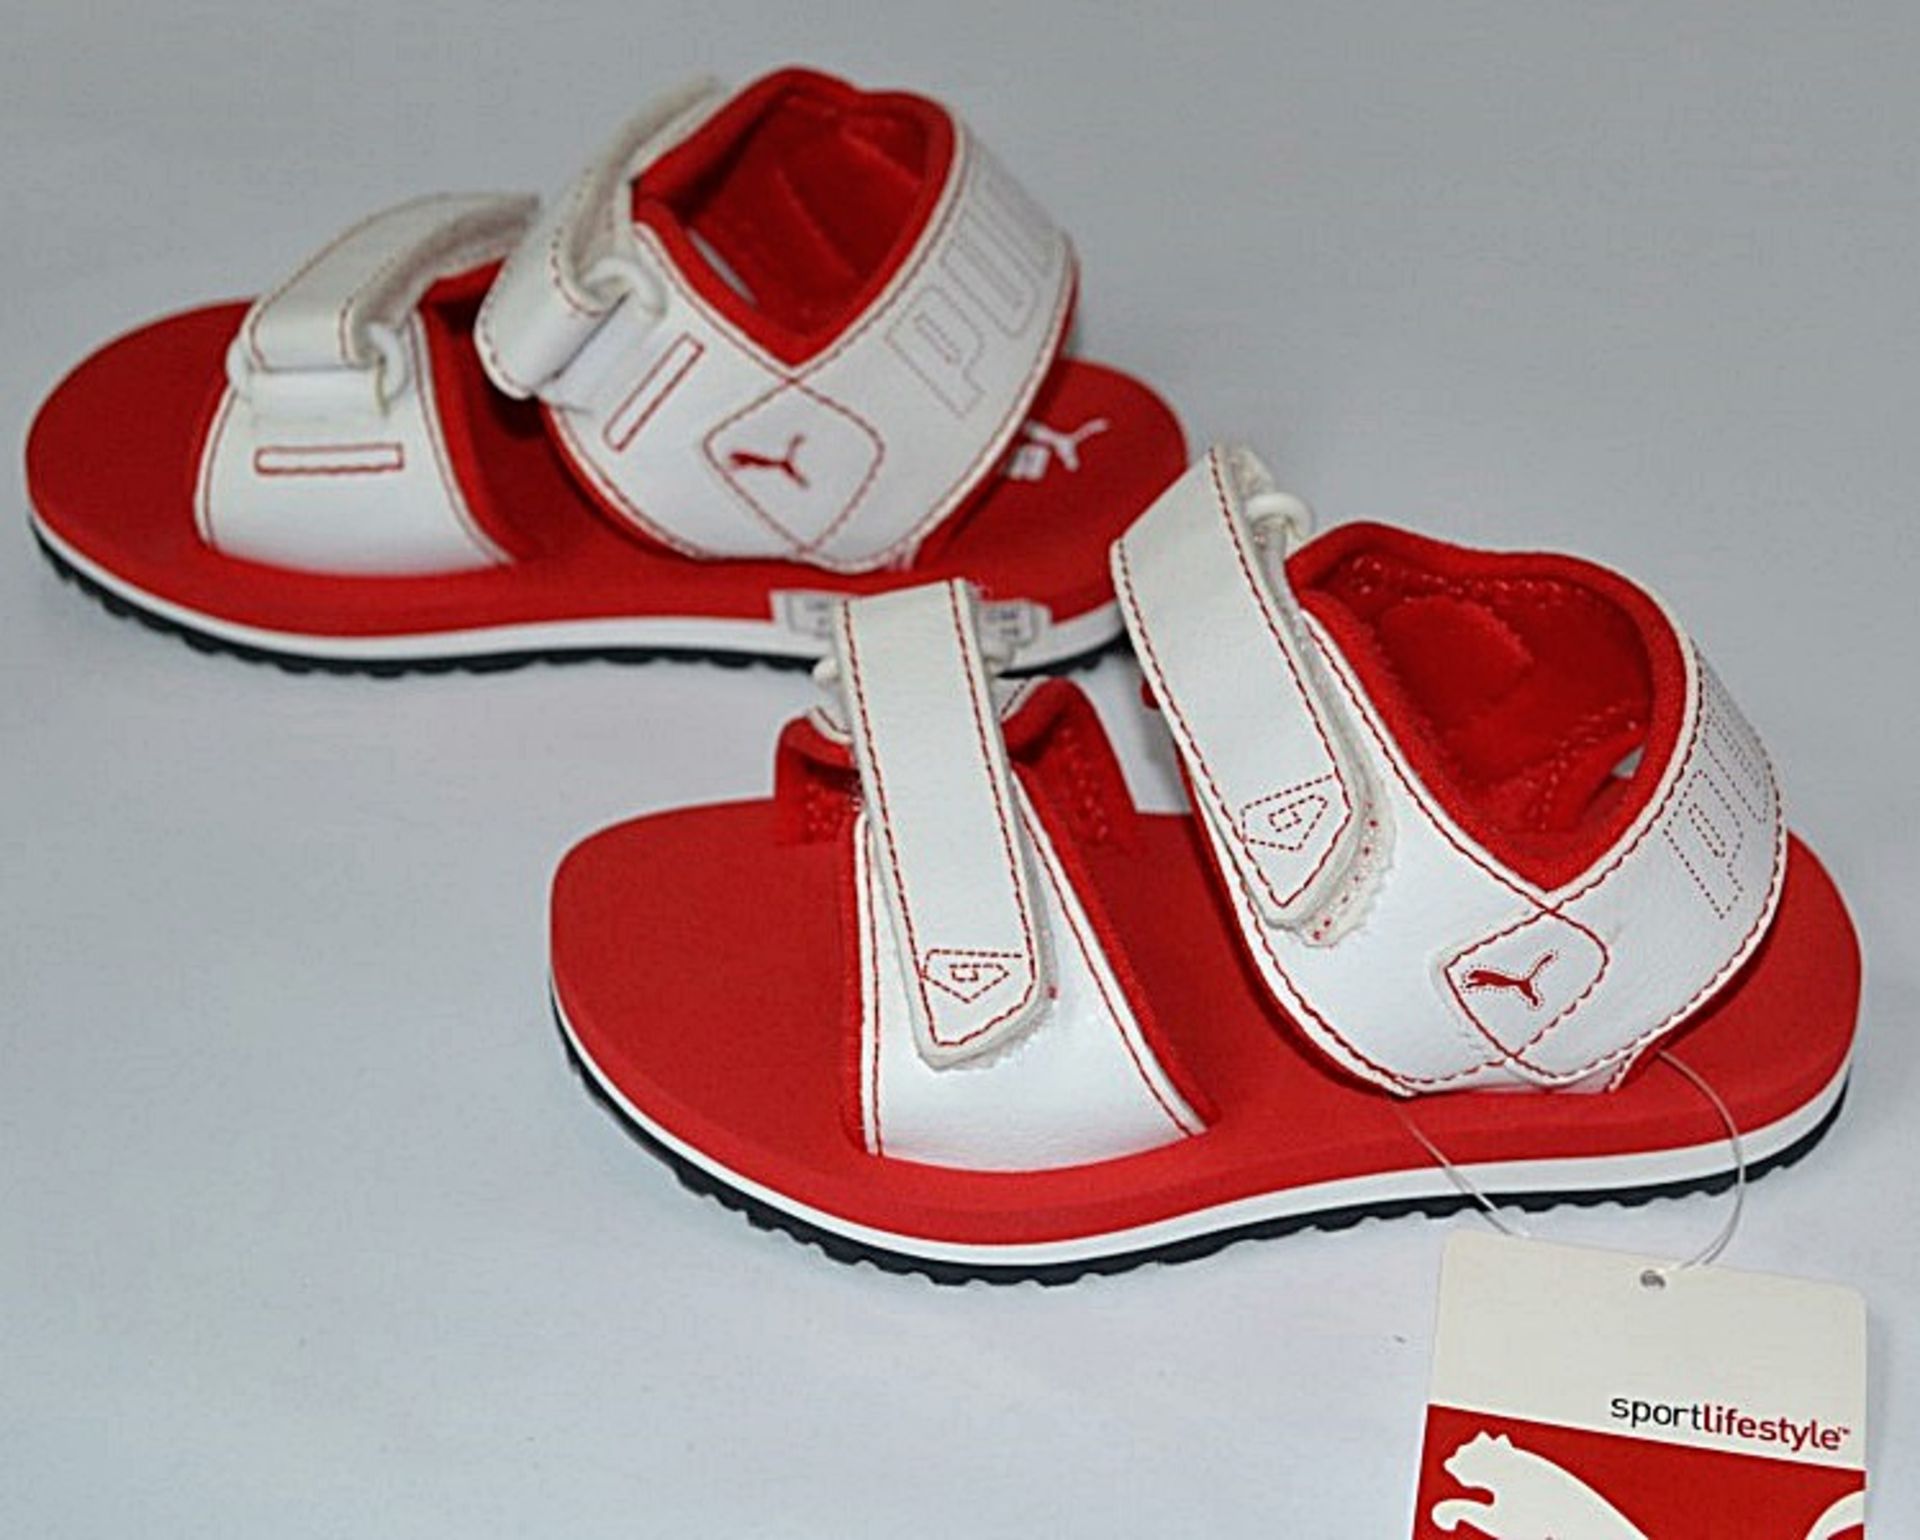 1 x Pair Of PUMA "Rundall Kids II" Trainers - Size: UK Child 7 - Colour: Red / White - CL155 - - Image 2 of 4